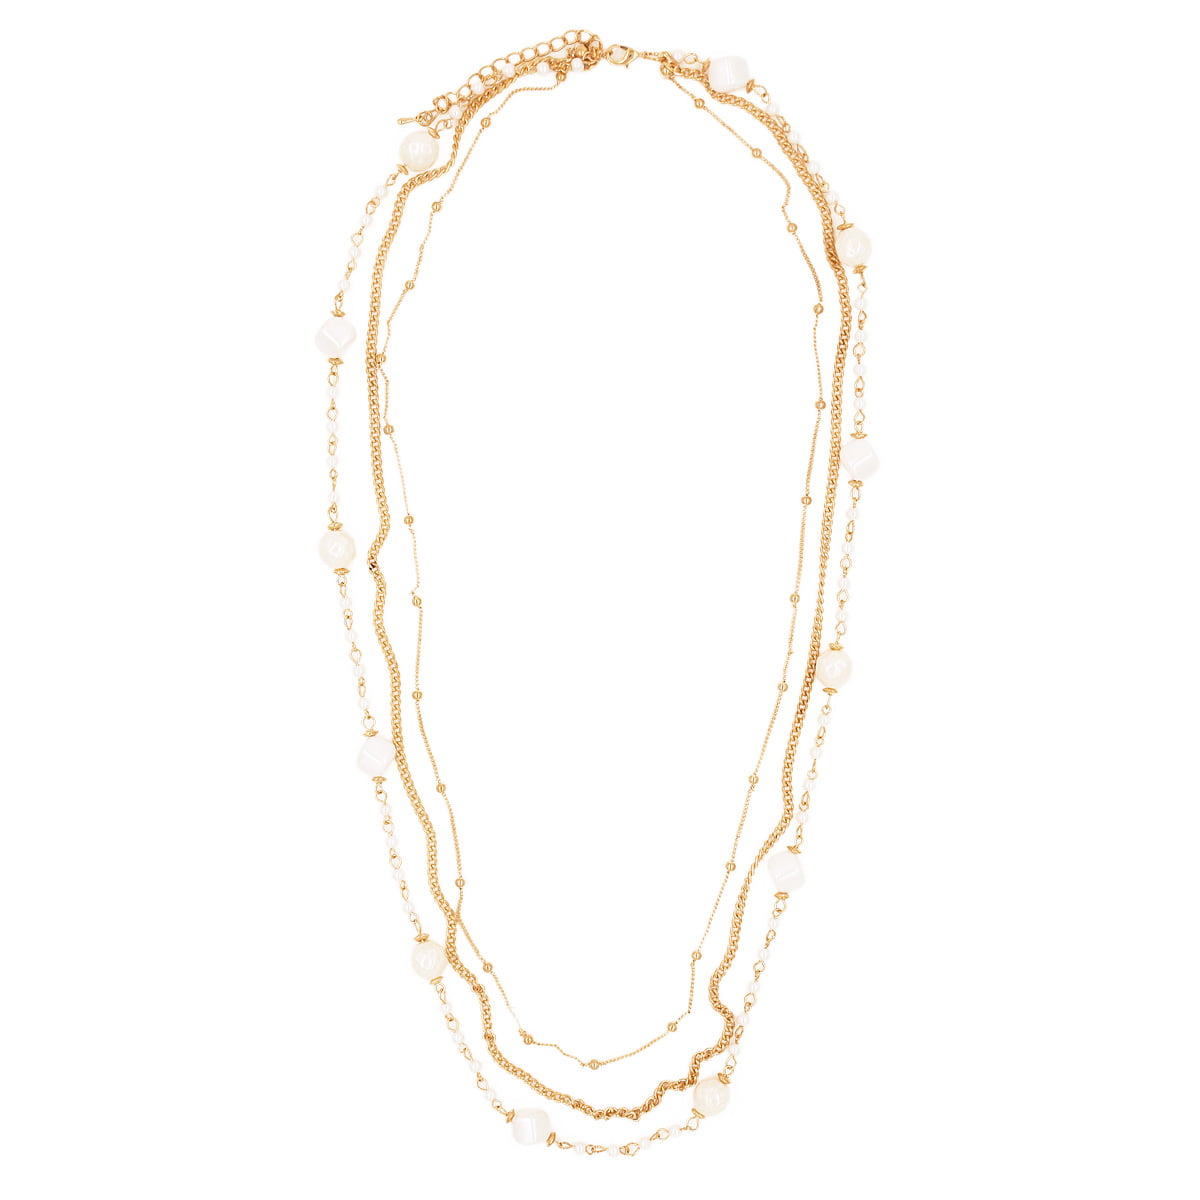 TrendsBlue Premium Long Simulated Pearl Beads Strand Fashion Necklace